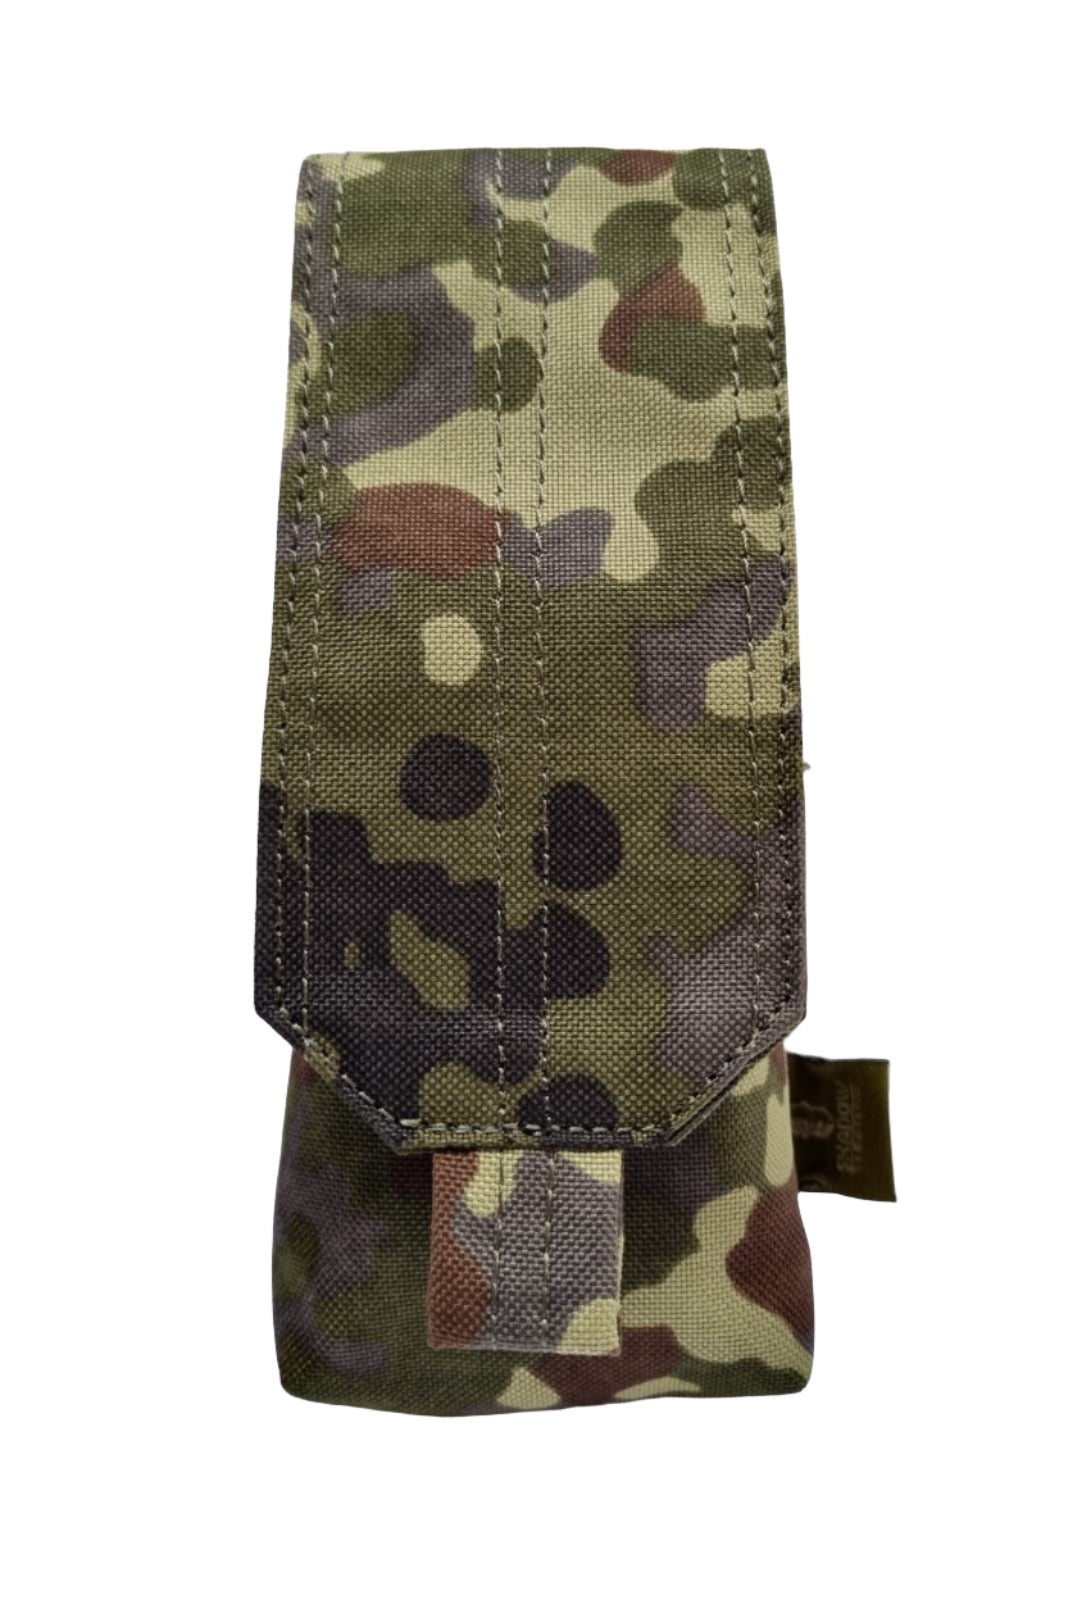 SHE-920 SINGLE M4 5.56MM MAG POUCH COLOR GERMAN FLECTARN